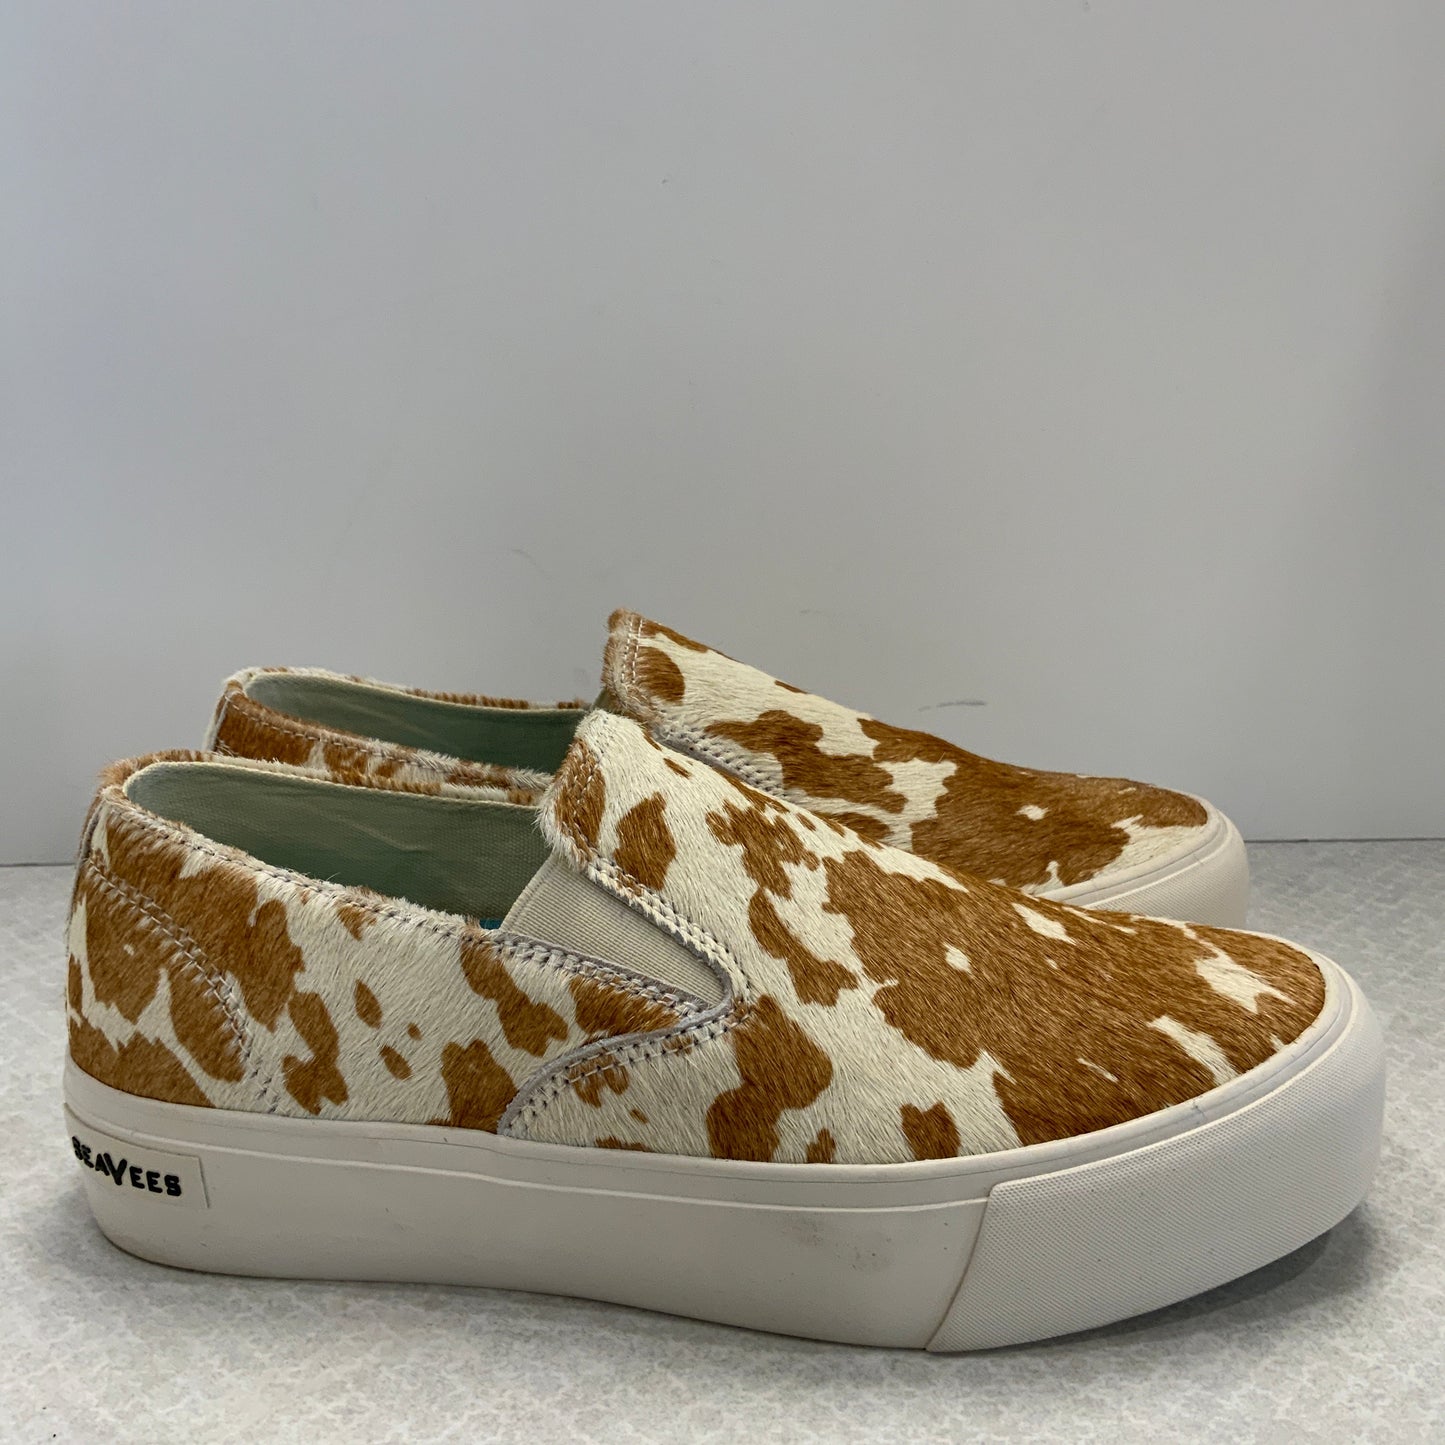 Animal Print Shoes Sneakers Seavees, Size 9